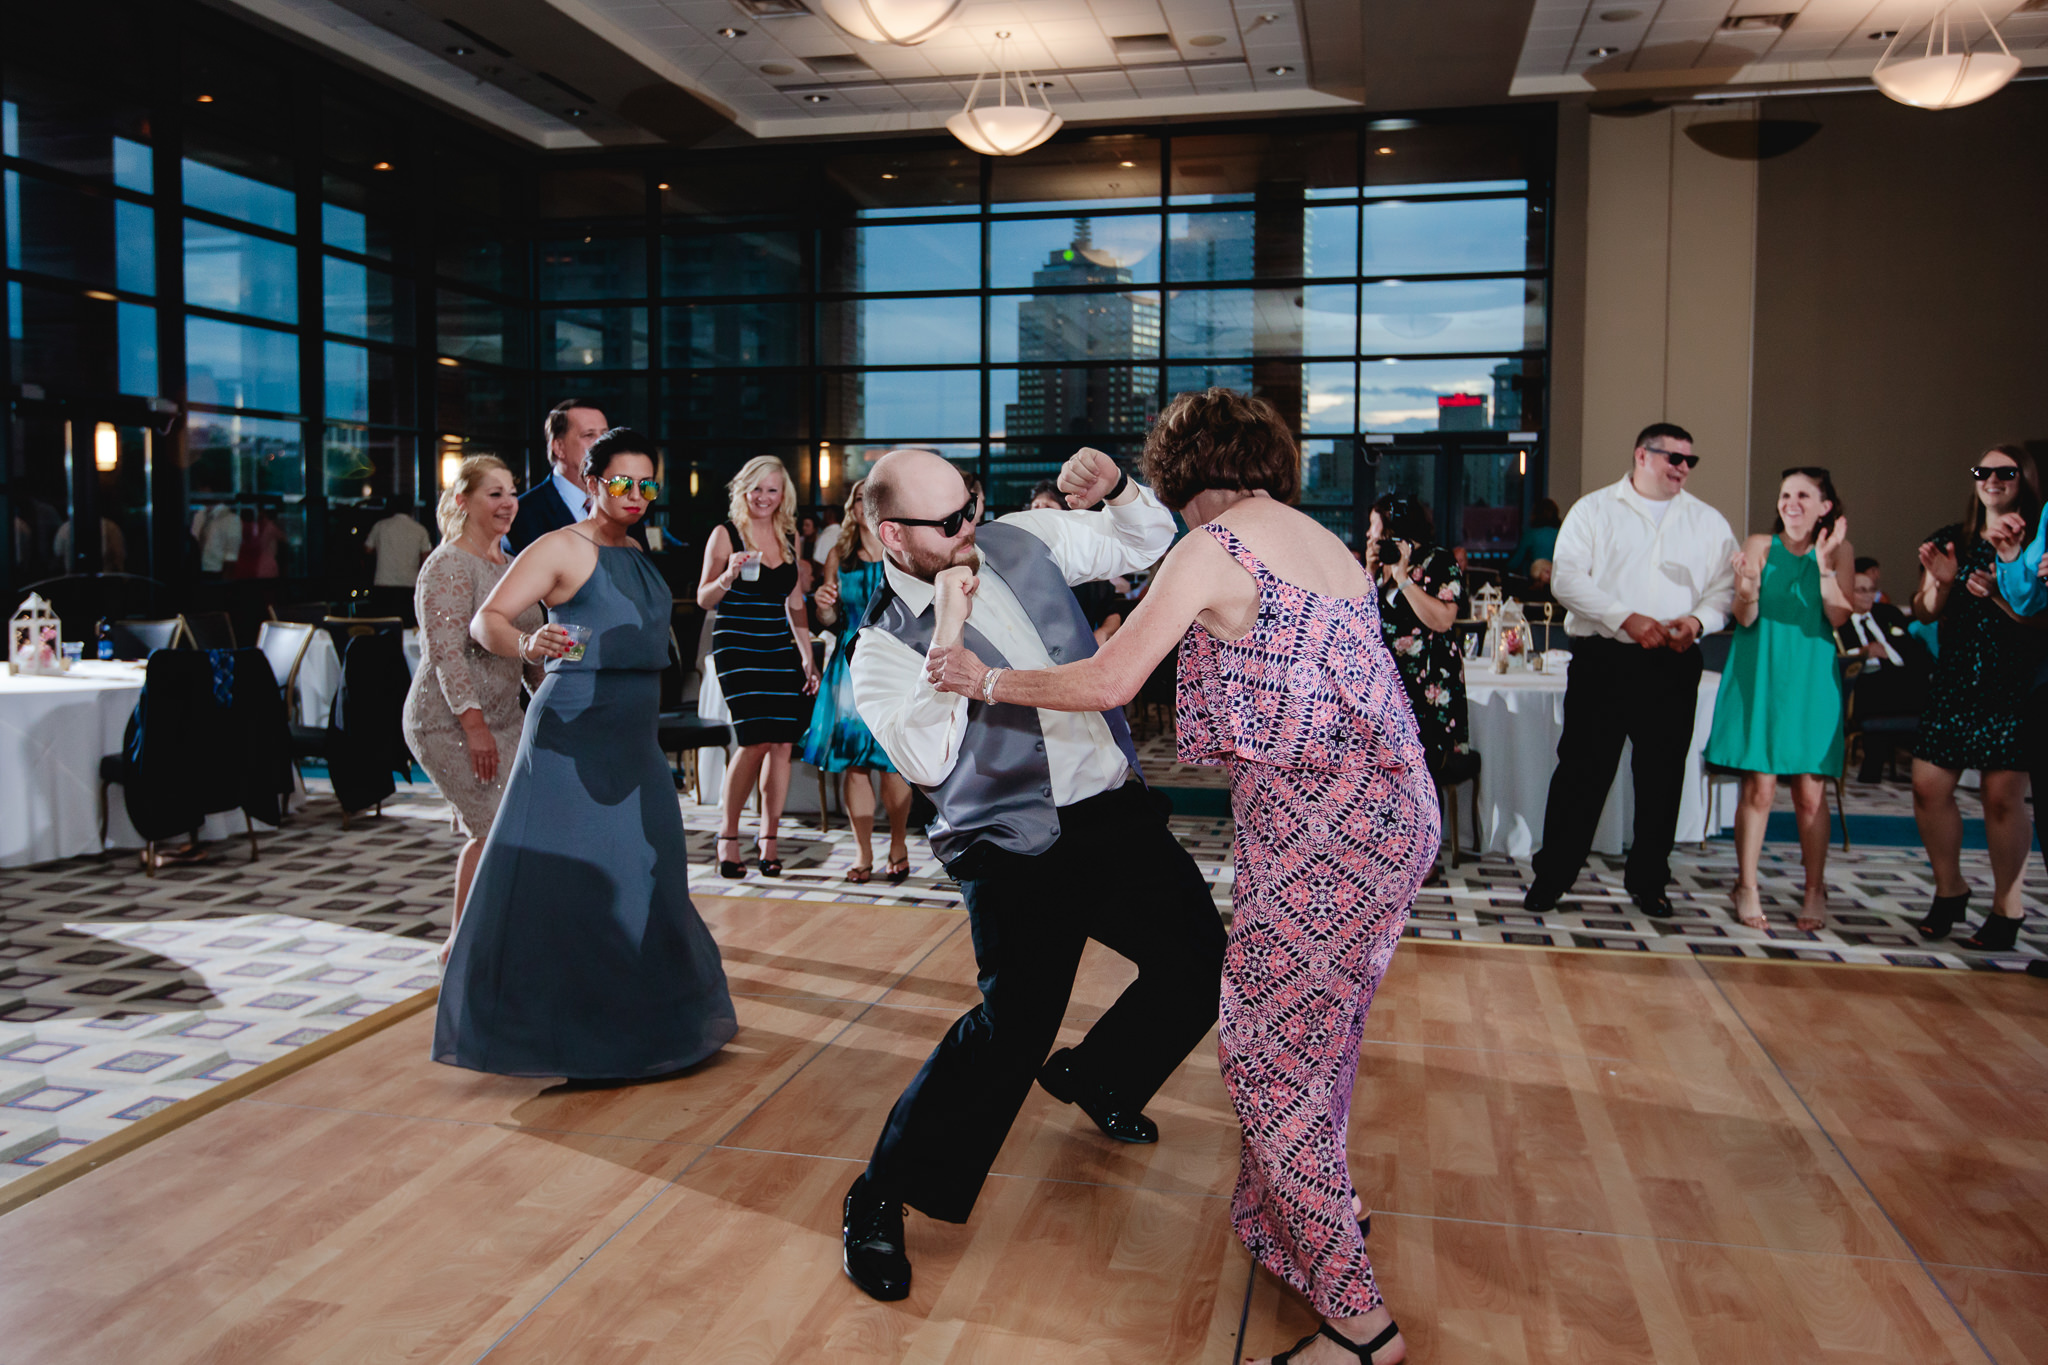 Groomsman dances with a guest at a Duquesne University wedding